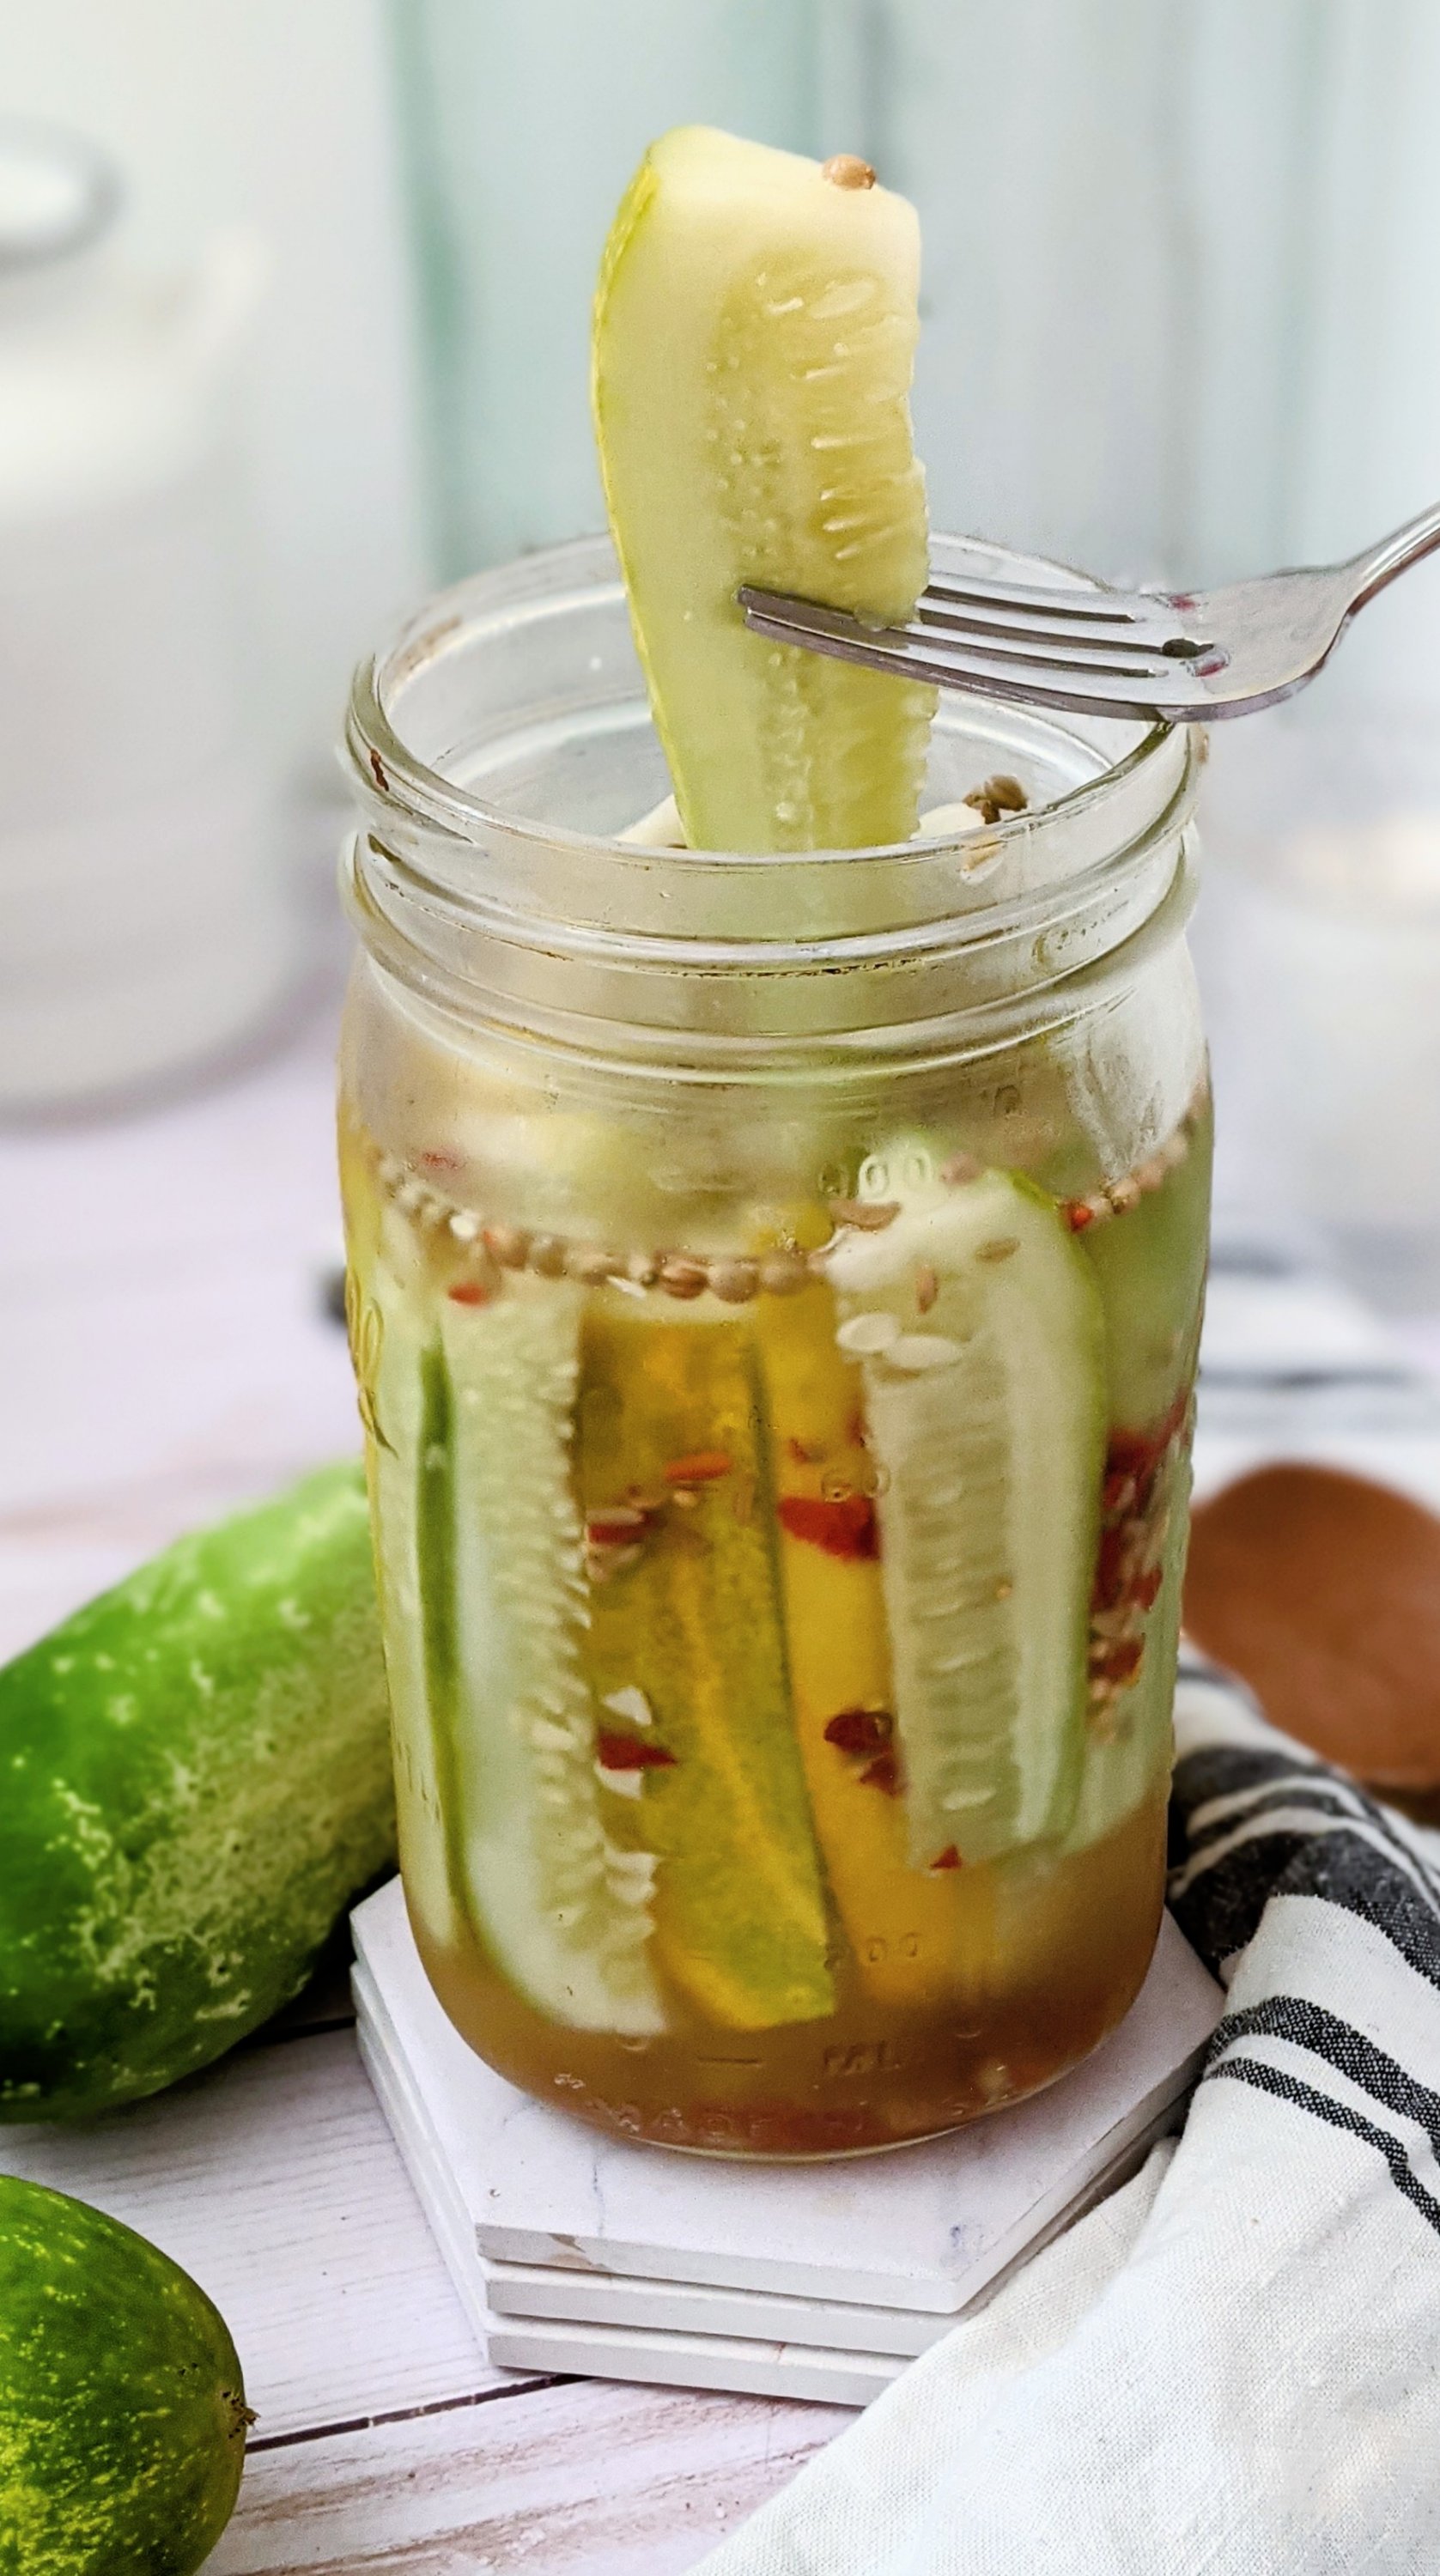 garden pickle recipe without dill pickles from garden cucumbers fresh pickles 1 hour quick marinated pickles without canning equipment no canning pickles healthy fresh pickles in 1 hour